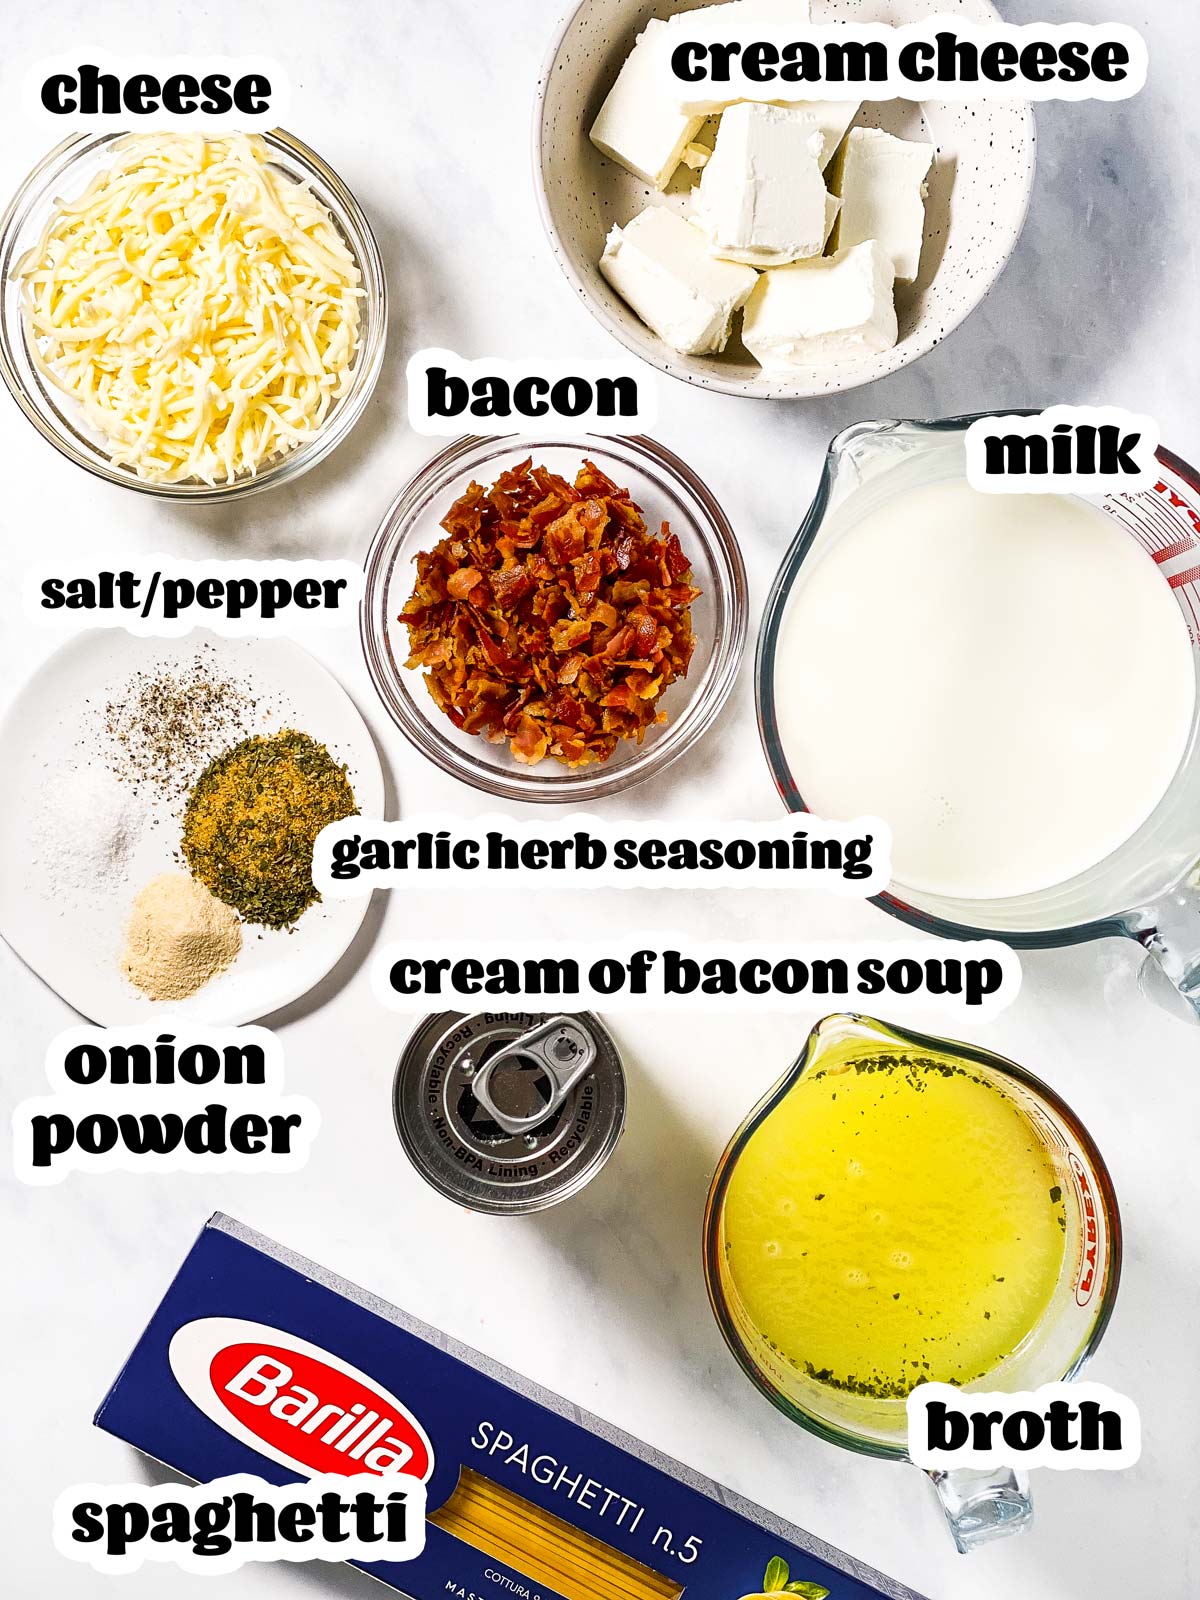 ingredients for bacon cream cheese pasta with text labels